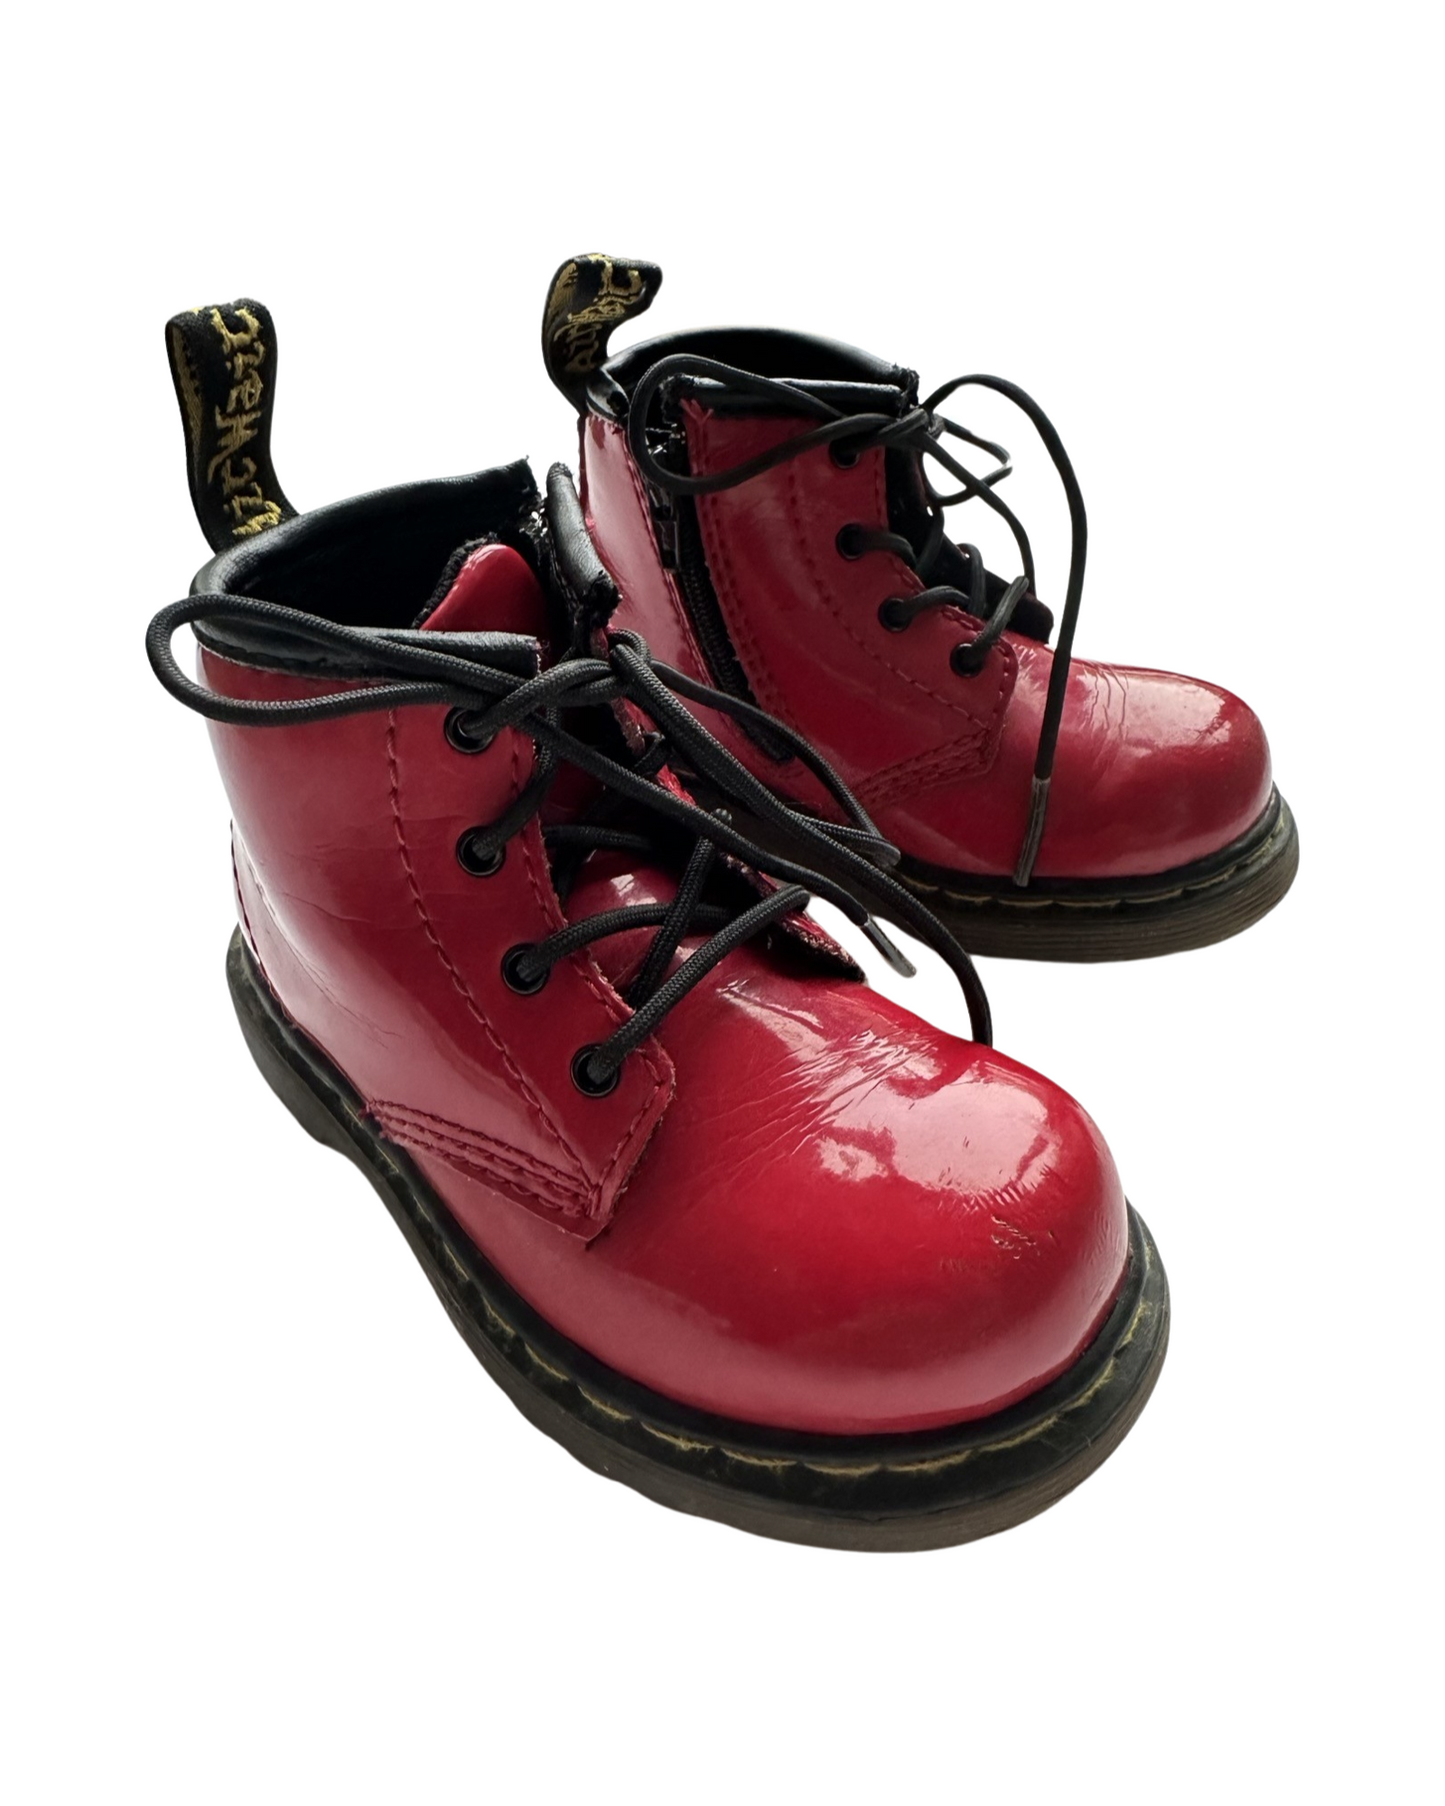 Dr Marten 1460 toddler boot in red (size UK5/EU21.5)